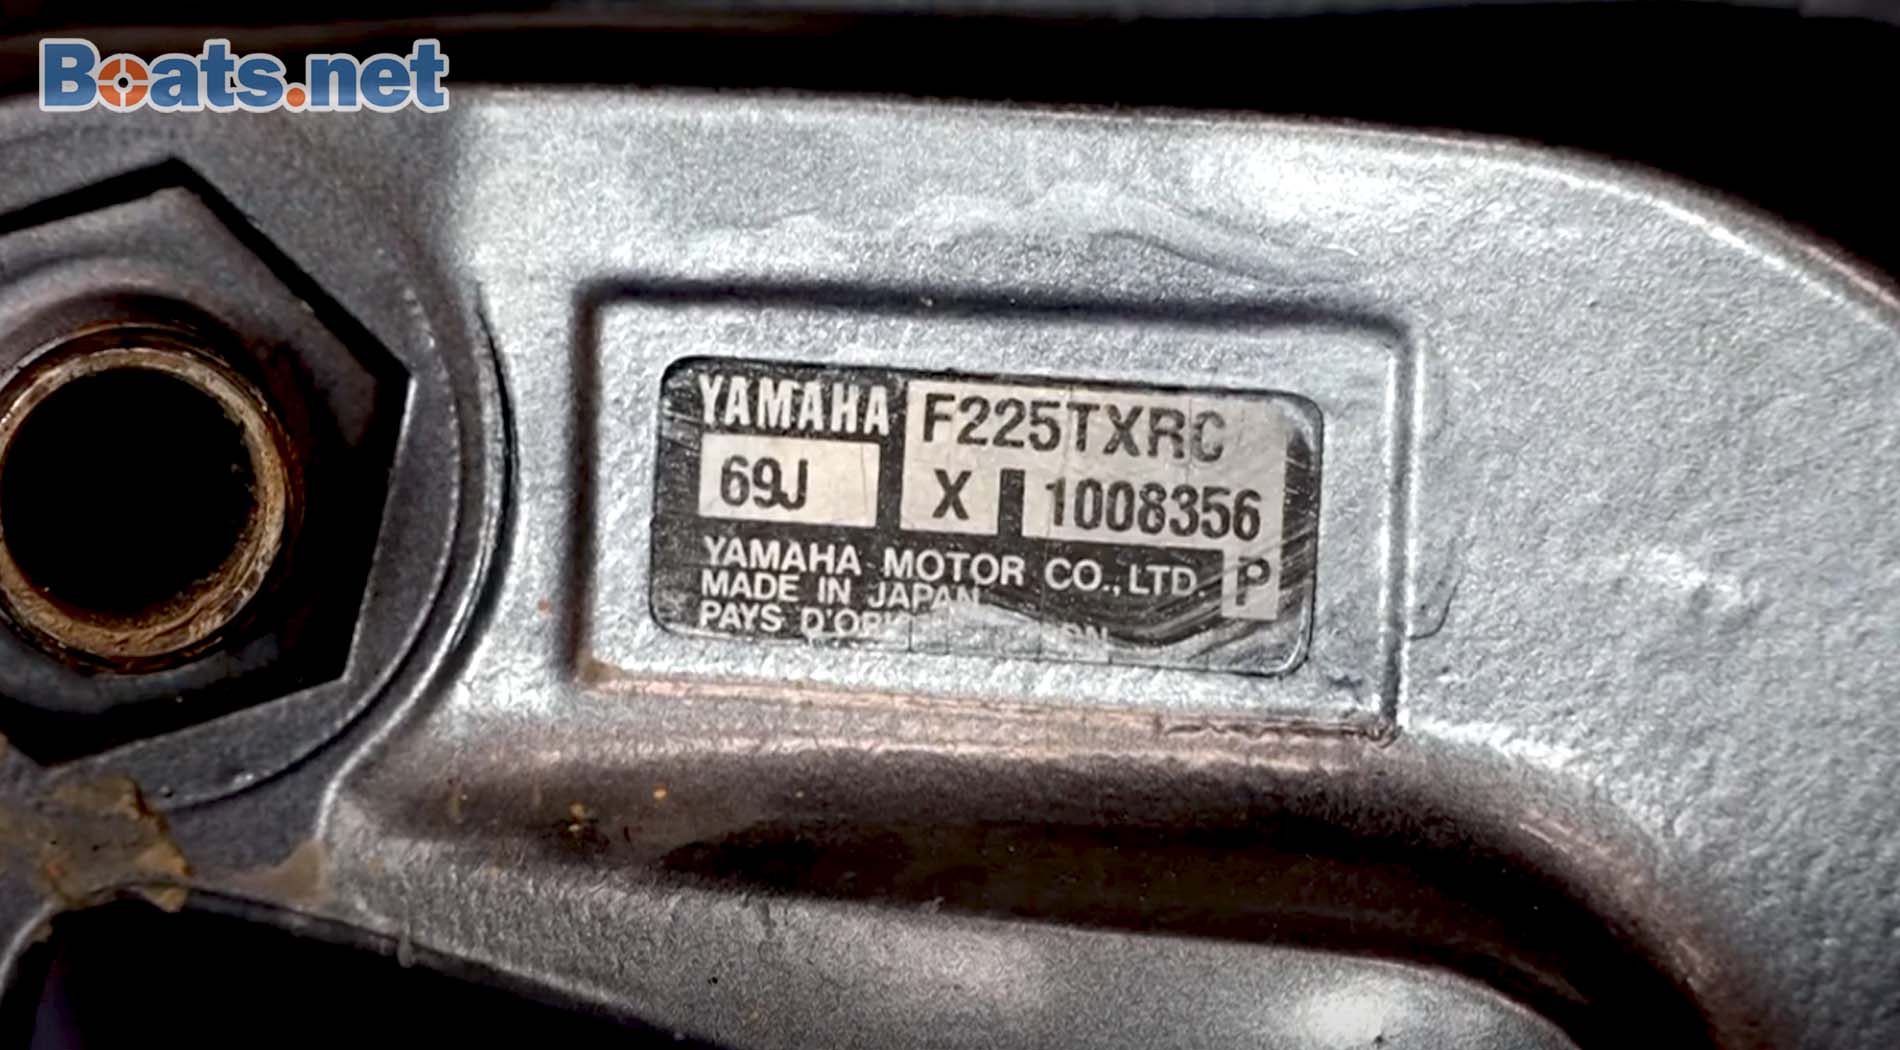 Yamaha outboard serial model numbers